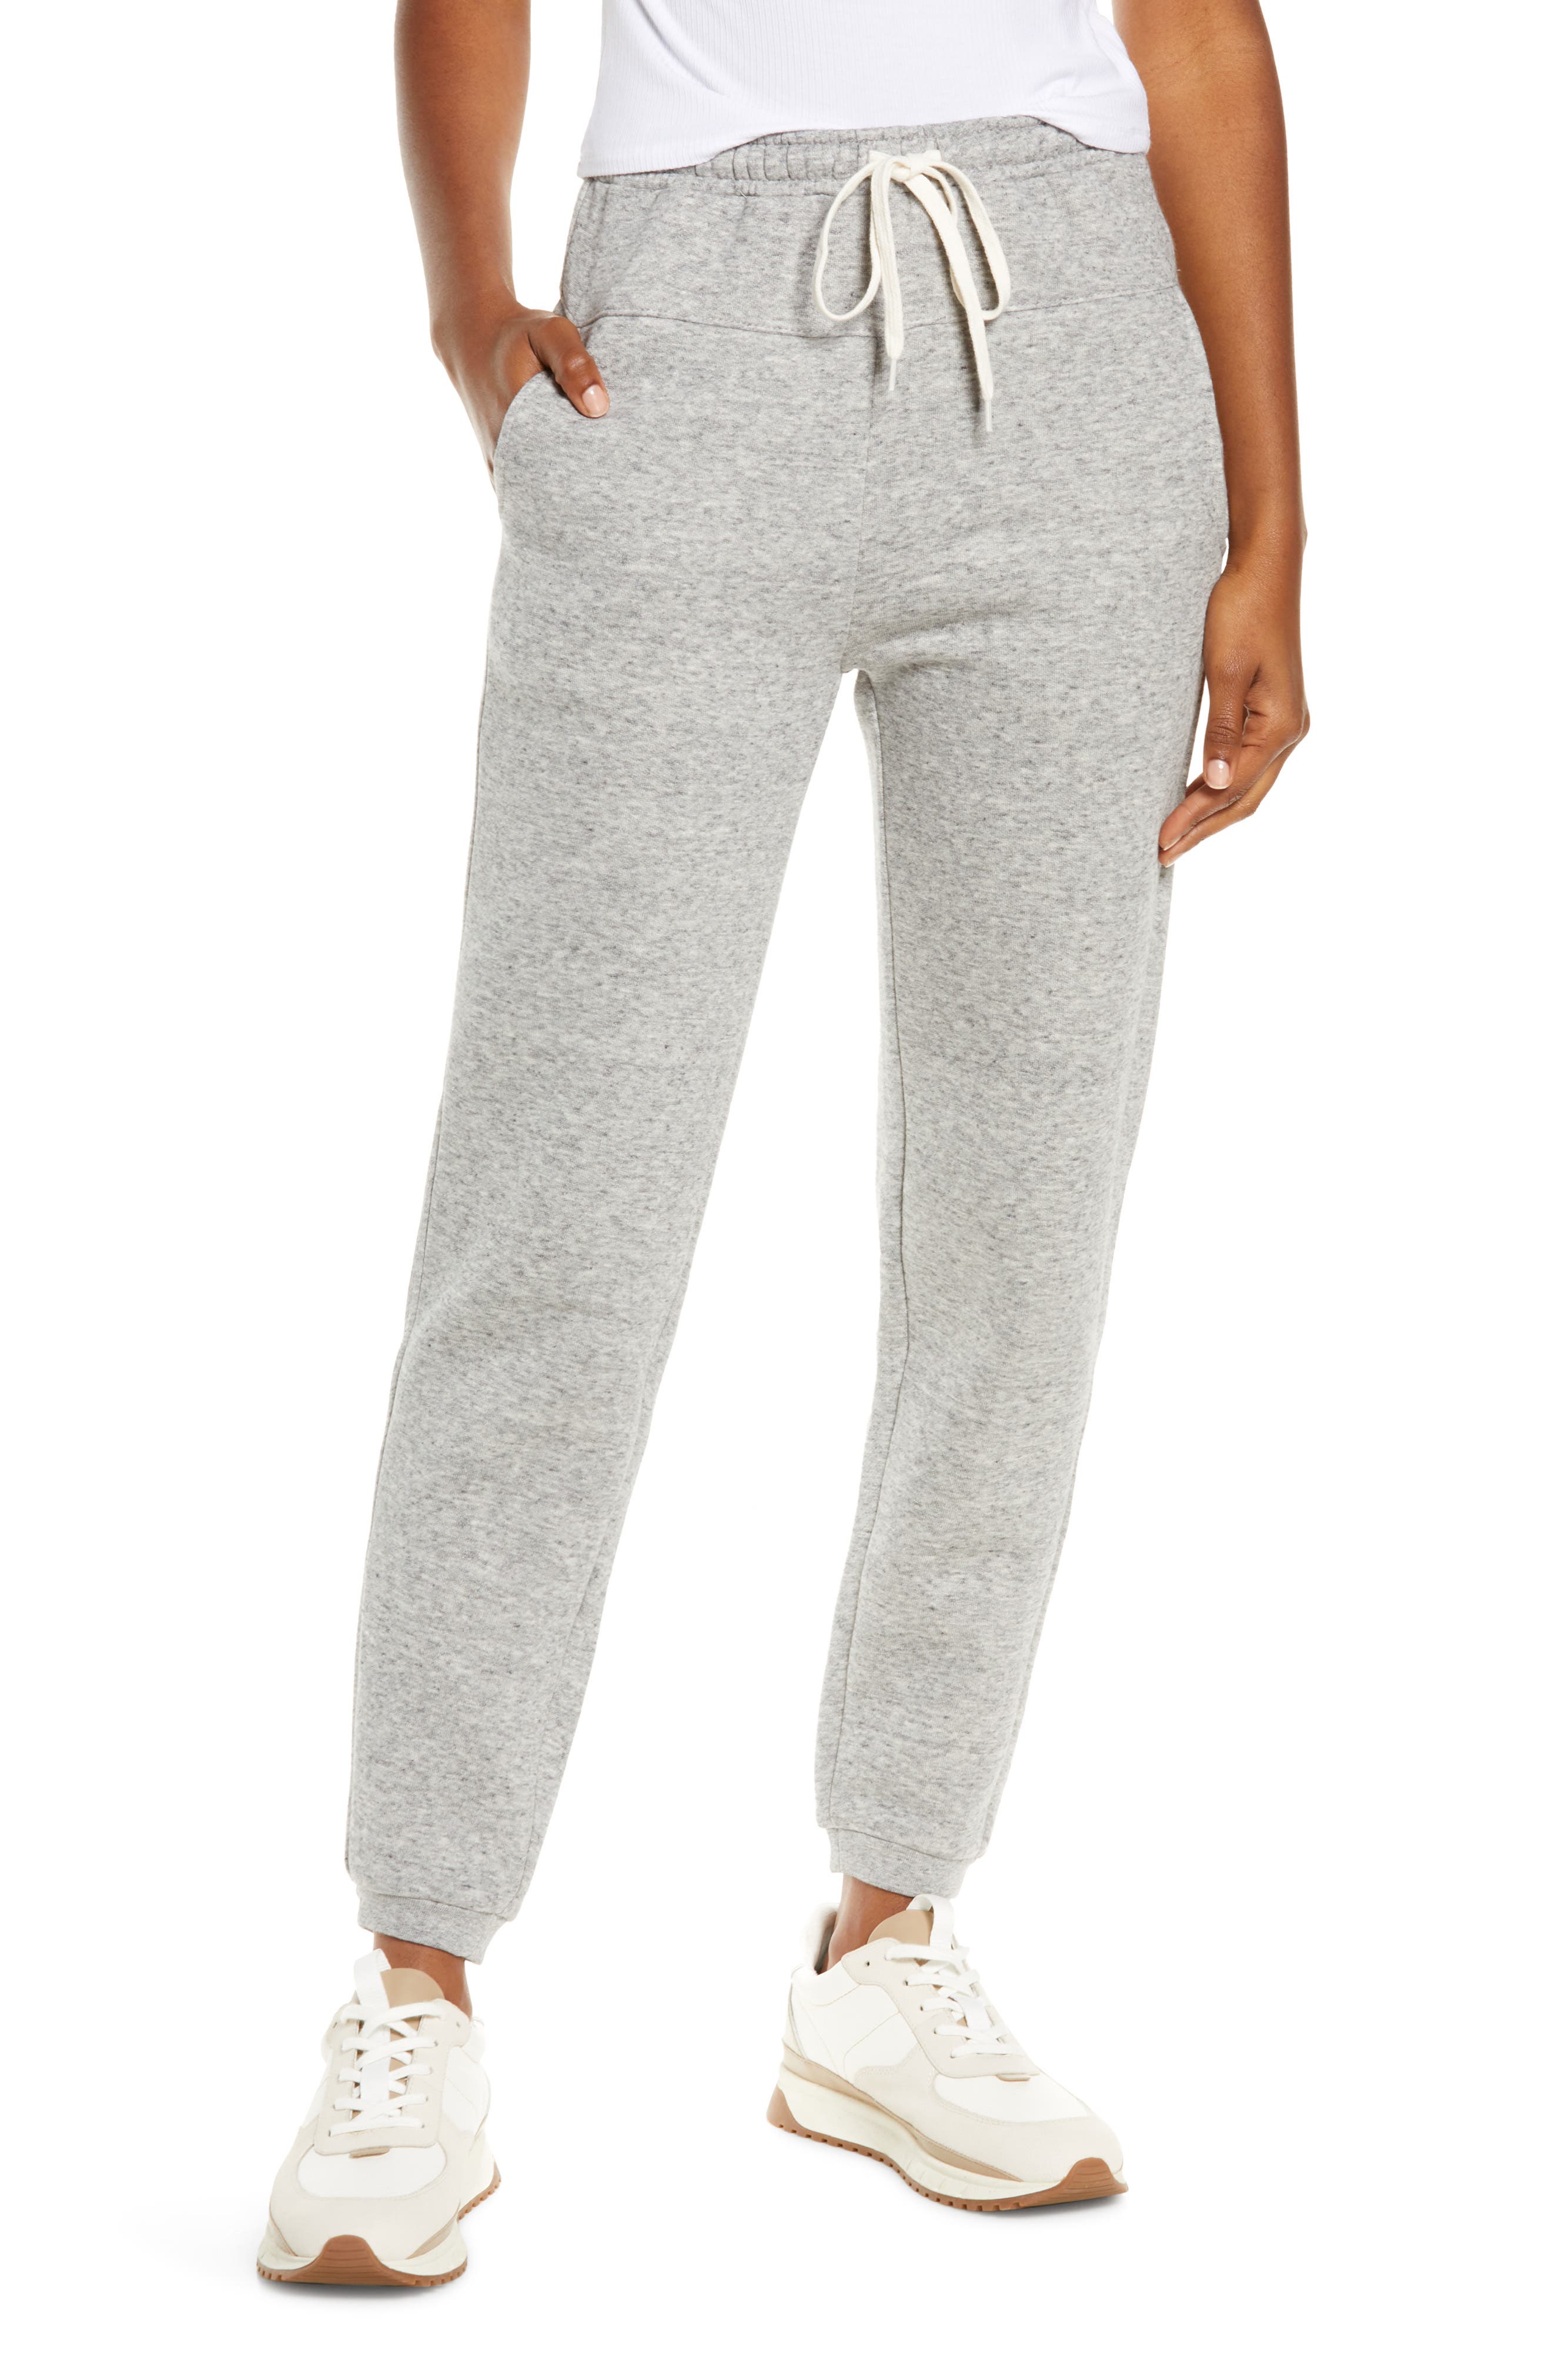 Madewell MWL Betterterry Jogger Sweatpants in Heather Pepper